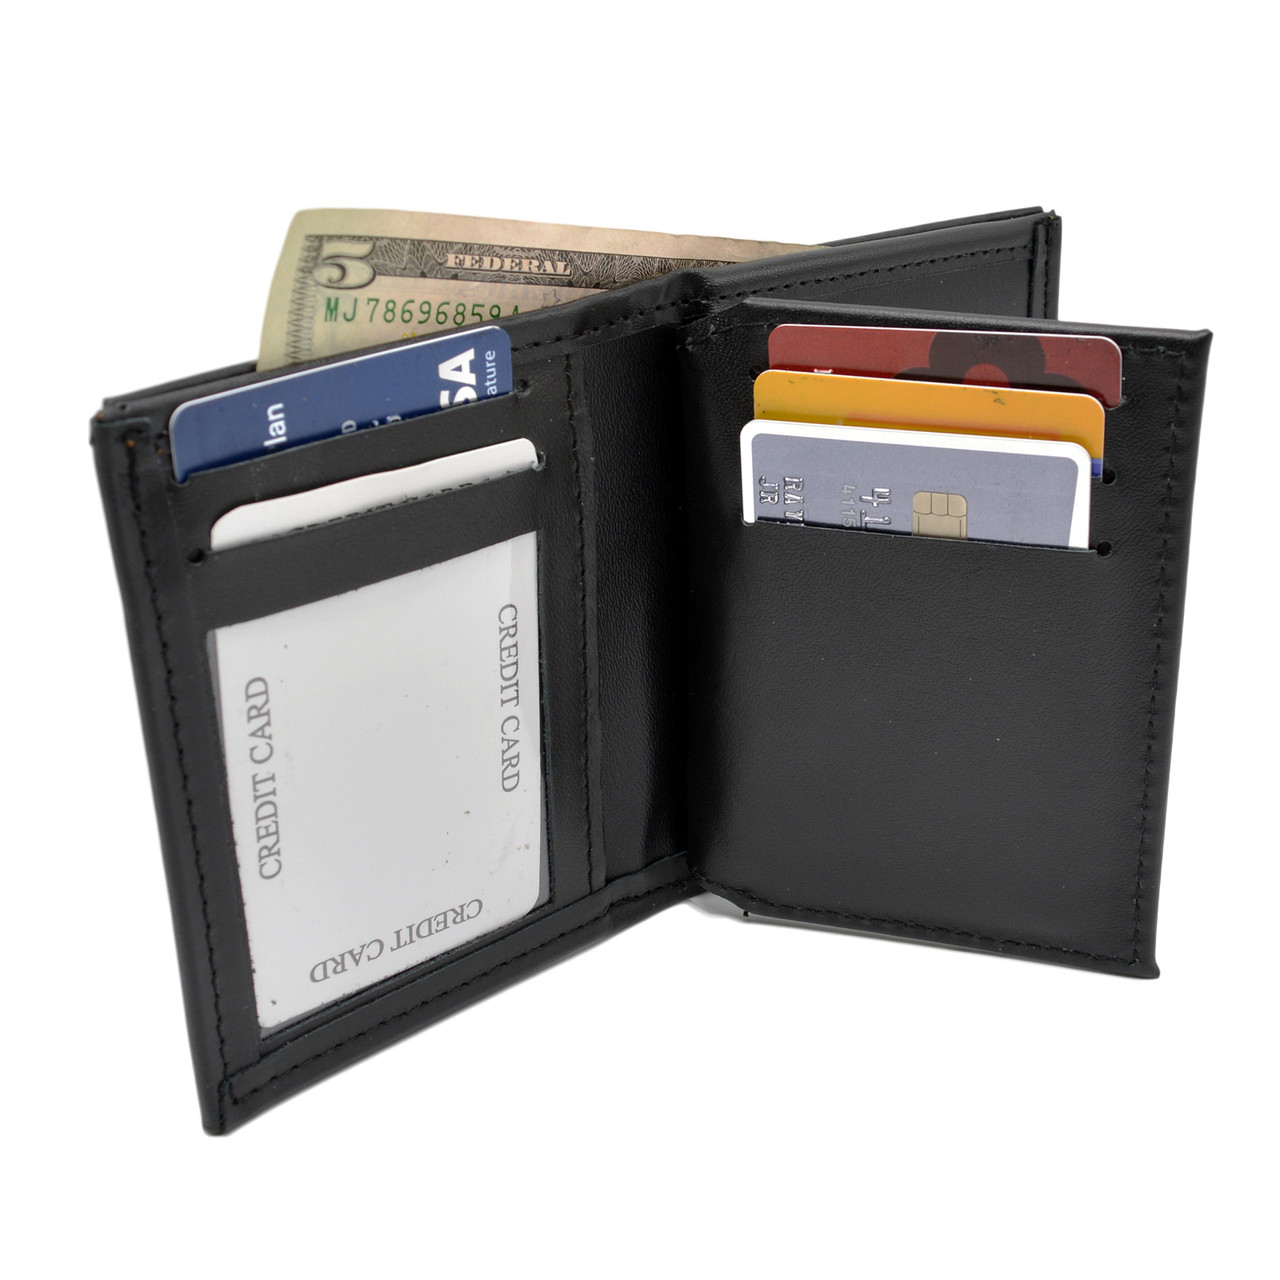 Perfect Fit Model 104-A Bifold Hidden Badge Wallet - Double ID - Cutout